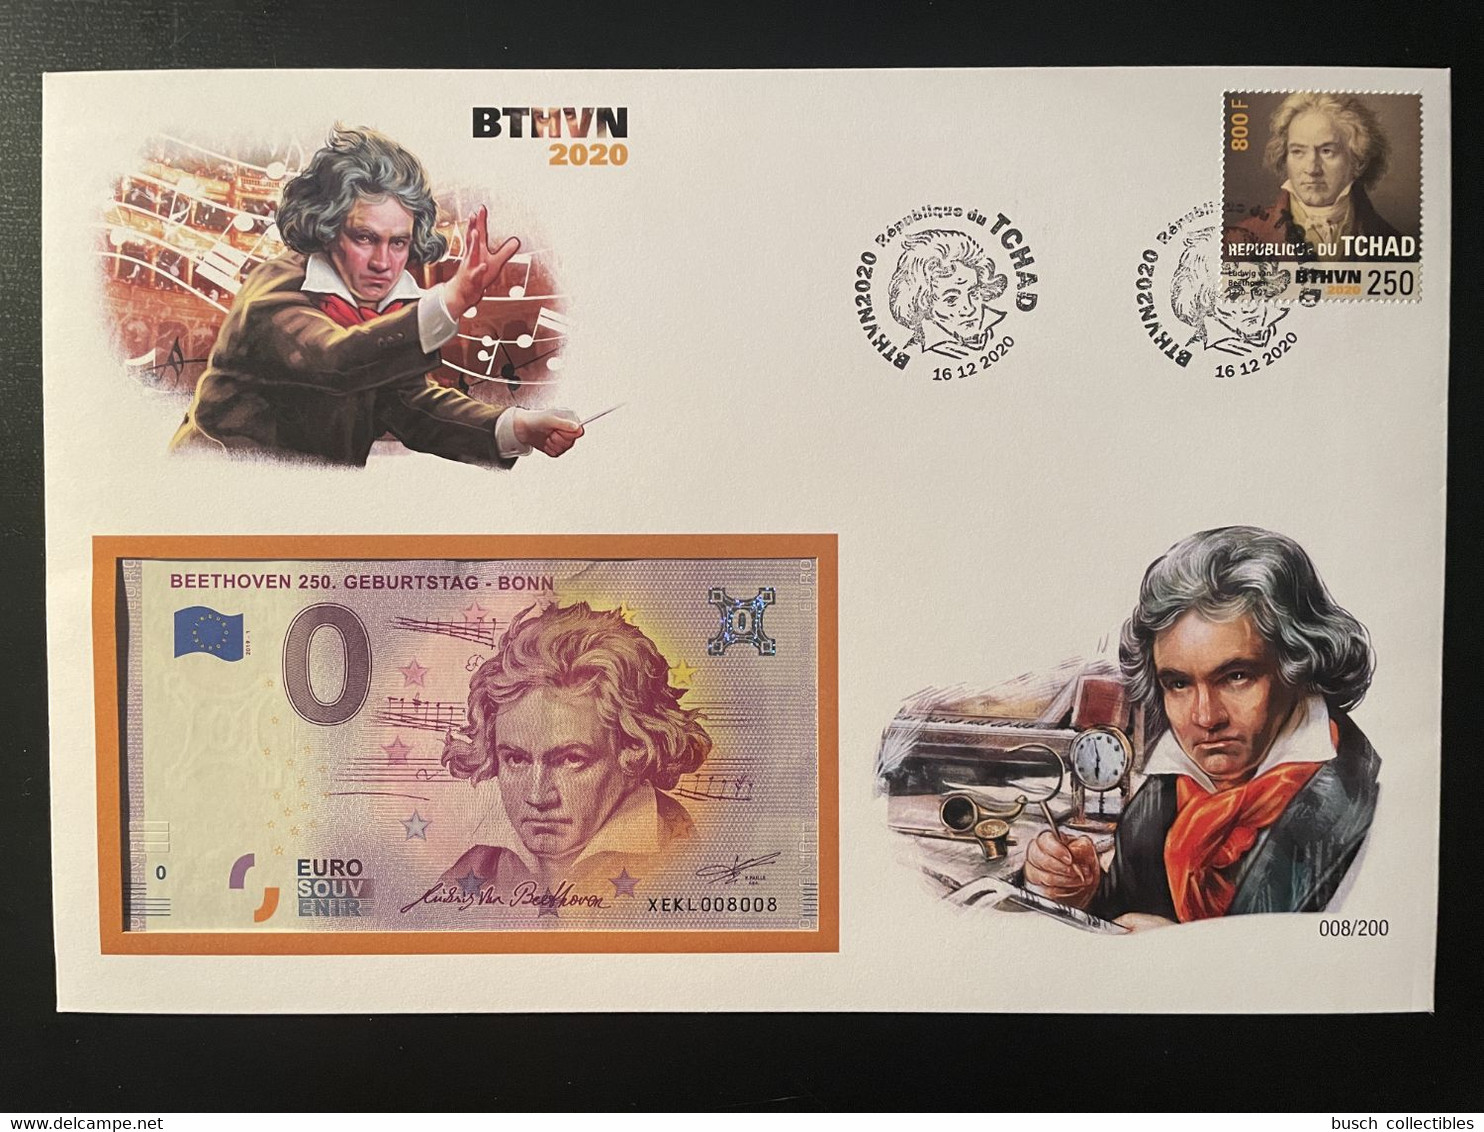 Euro Souvenir Banknote Cover 250. Geburtstag Ludwig Van Beethoven Musik Music Tchad Chad BTHVN Banknotenbrief - Private Proofs / Unofficial